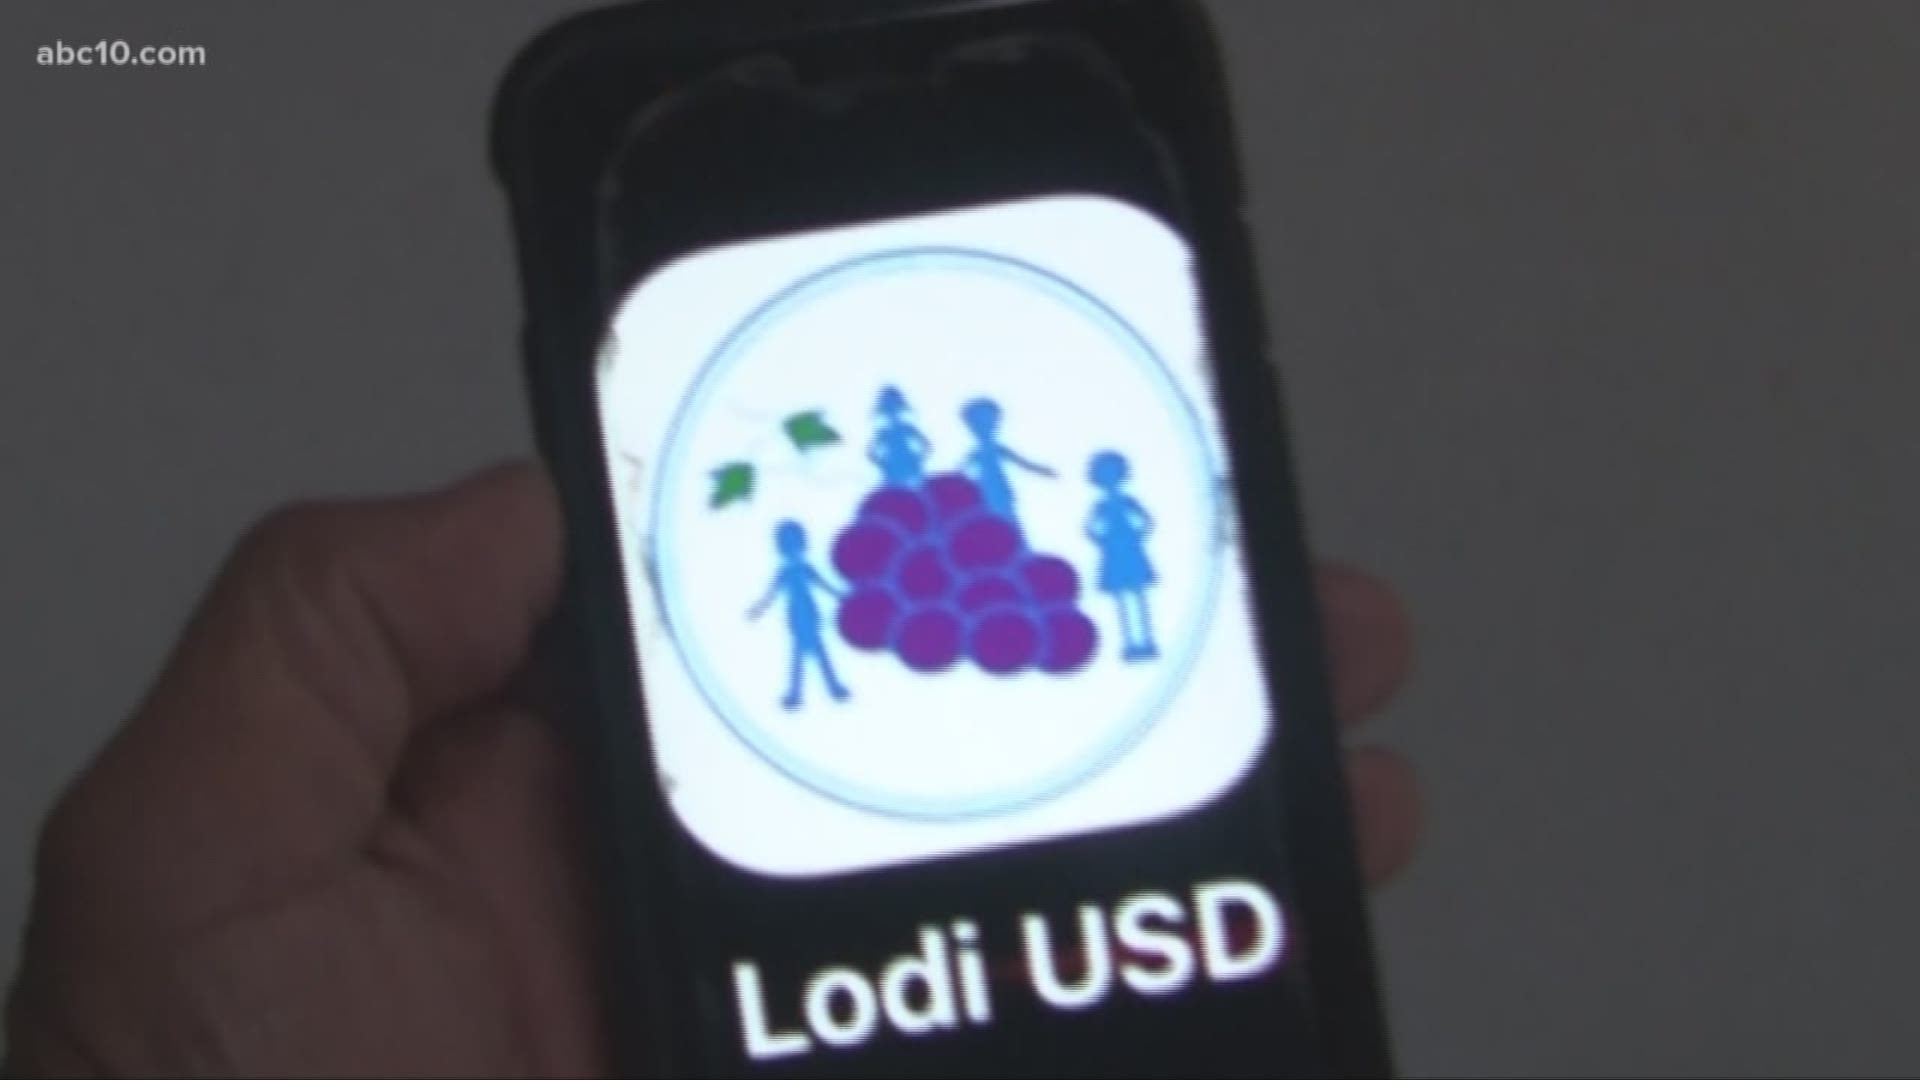 Called Lodi USD, the app gives students and parents access to grades, assignments, attendance, push notifications for emergencies, events and more.